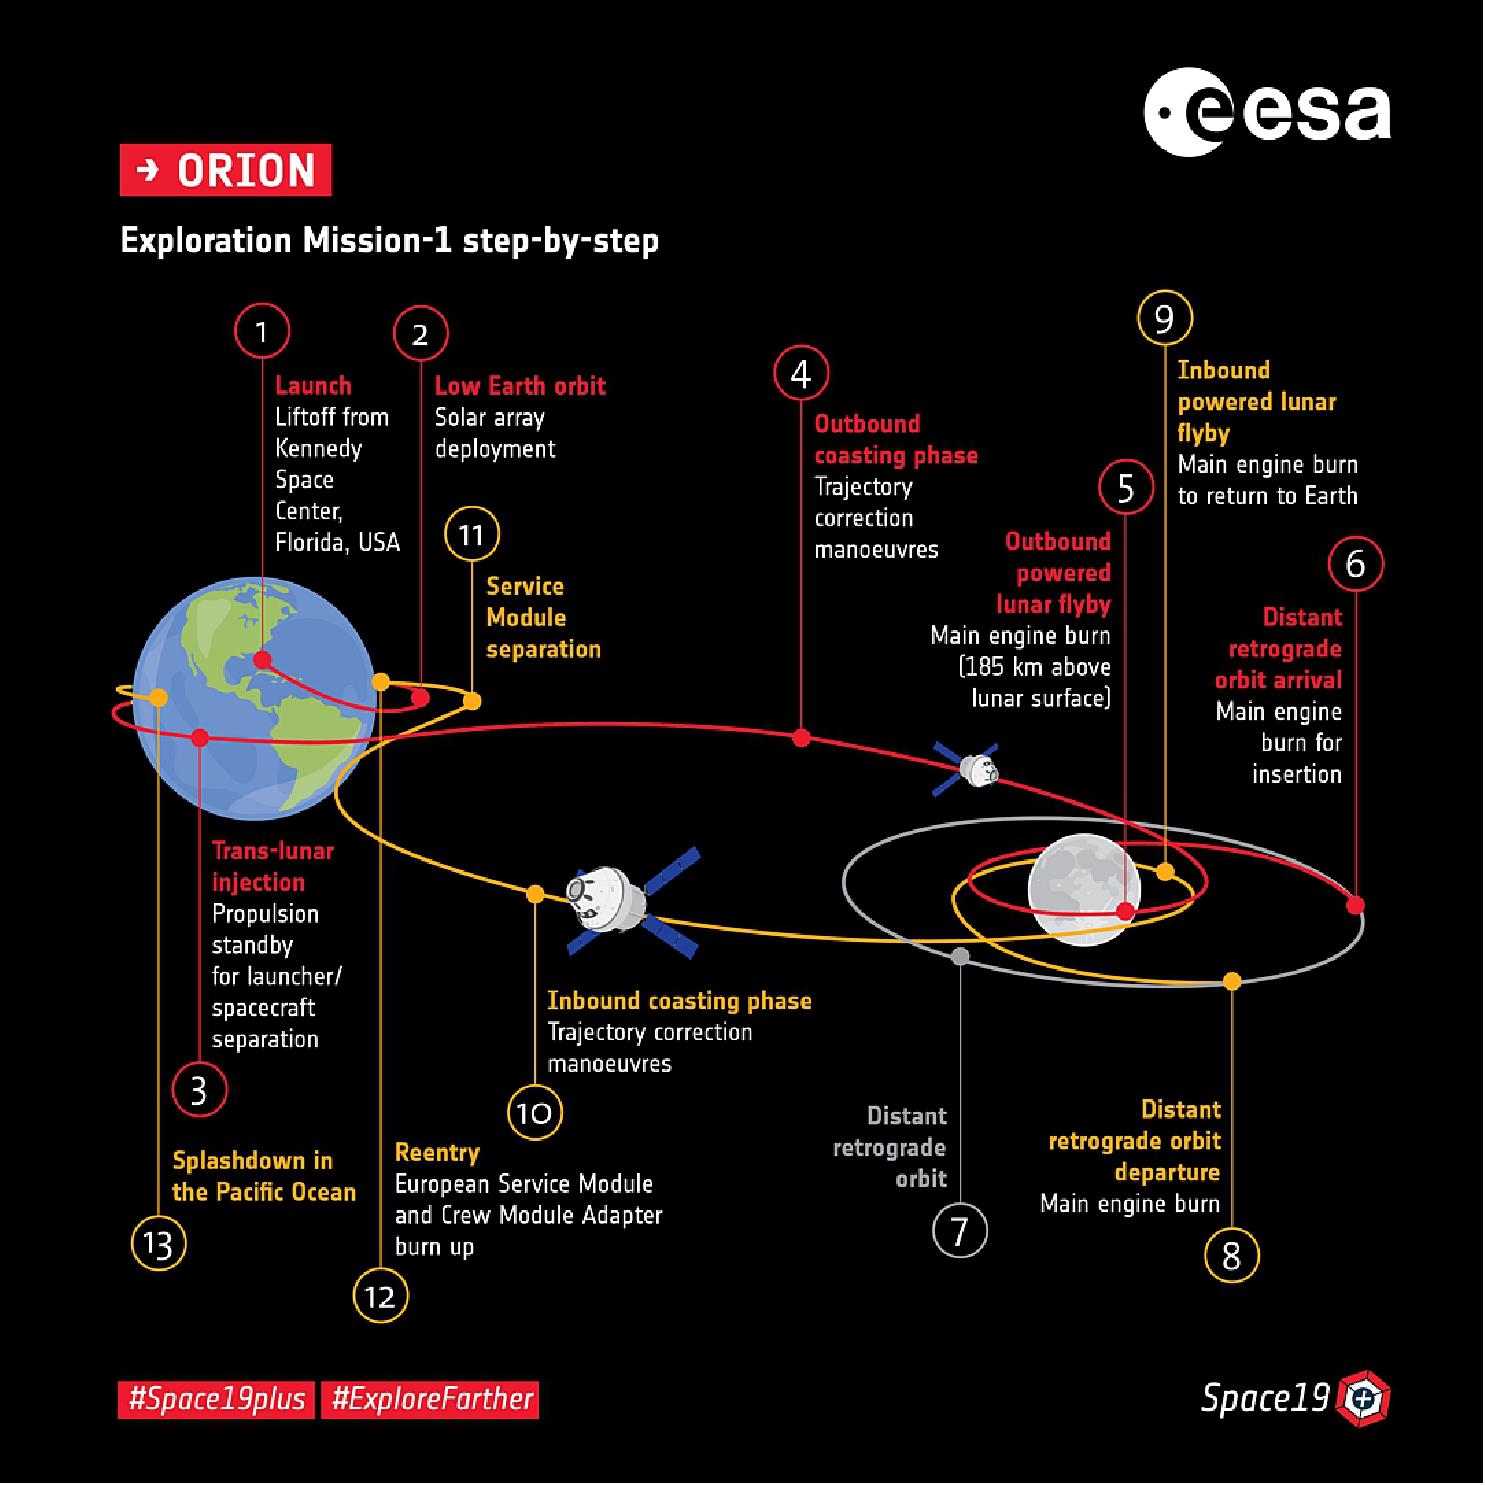 Figure 48: Exploration Mission-1 step-by-step. Orion is NASA’s next spacecraft to send humans into space. It is designed to send astronauts farther into space than ever before, beyond the Moon to asteroids and even Mars. ESA has designed and is overseeing the development of Orion’s service module, the part of the spacecraft that supplies air, electricity and propulsion. Much like a train engine pulls passenger carriages and supplies power, the European Service Module will take the Orion capsule to its destination and back (image credit: ESA–K. Oldenburg)